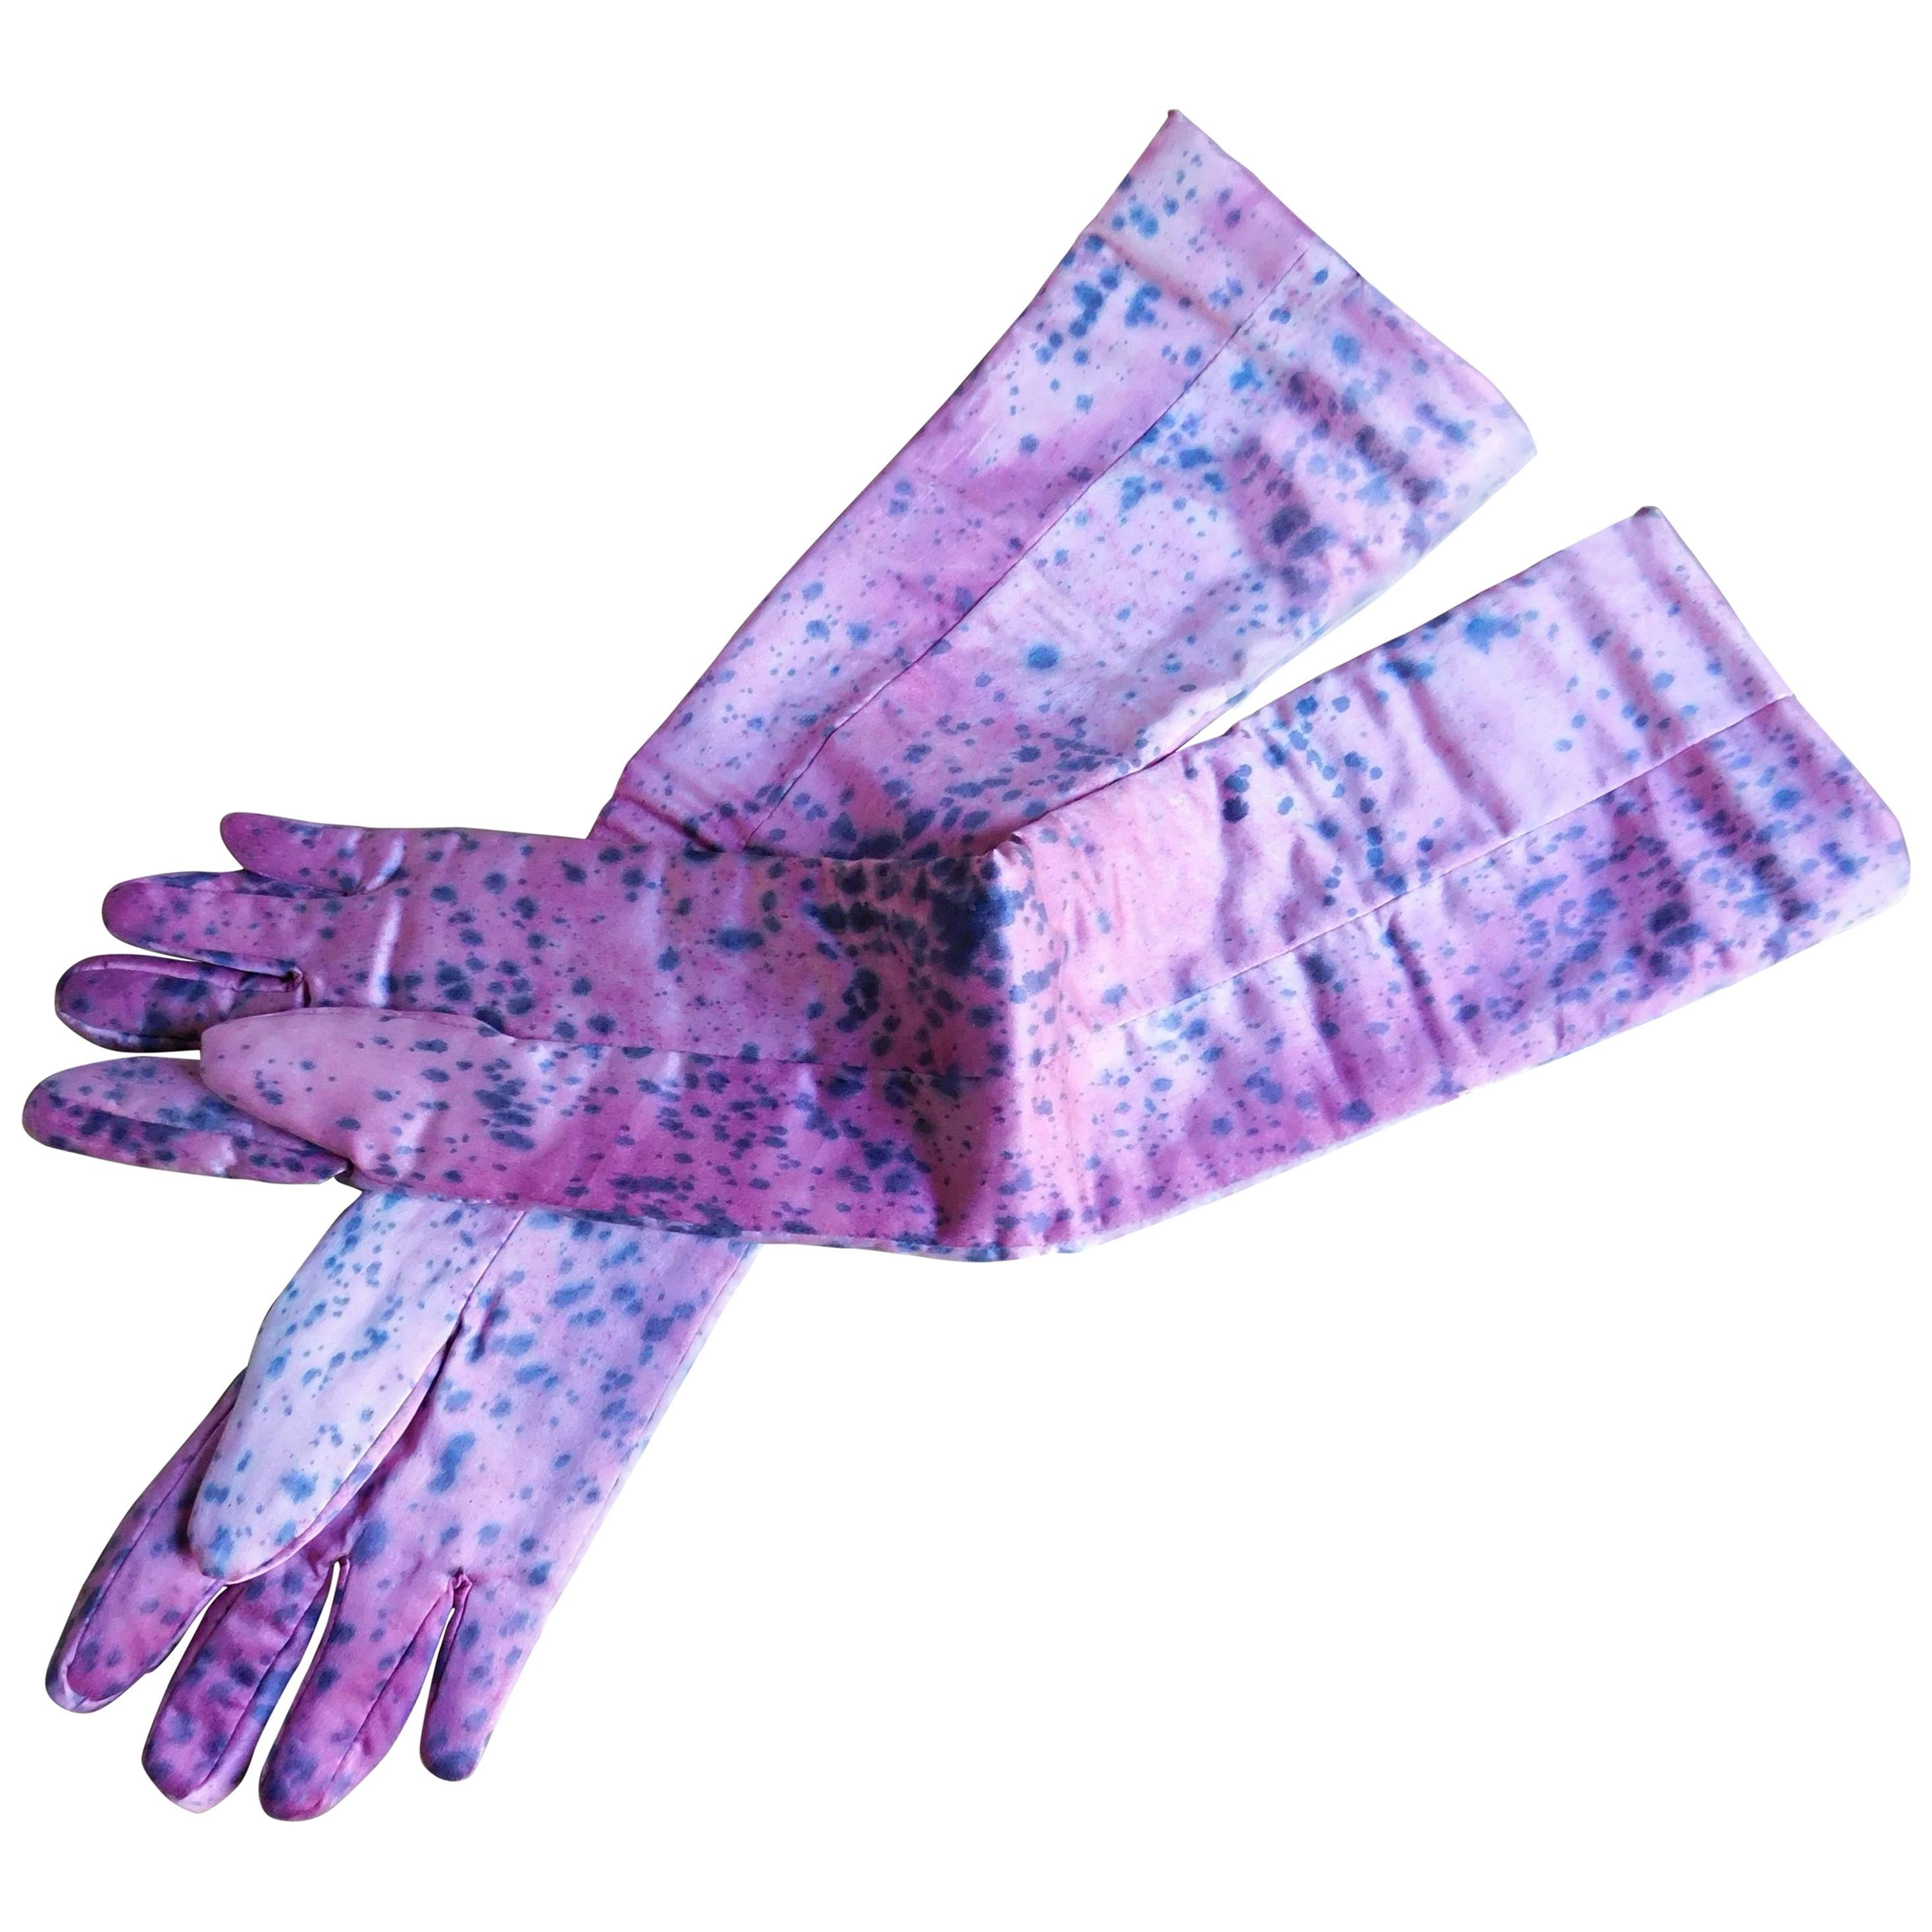  Long Pink Silk Gloves with Hand Dyed Spatter Pattern By Katrien Van Hecke For Sale